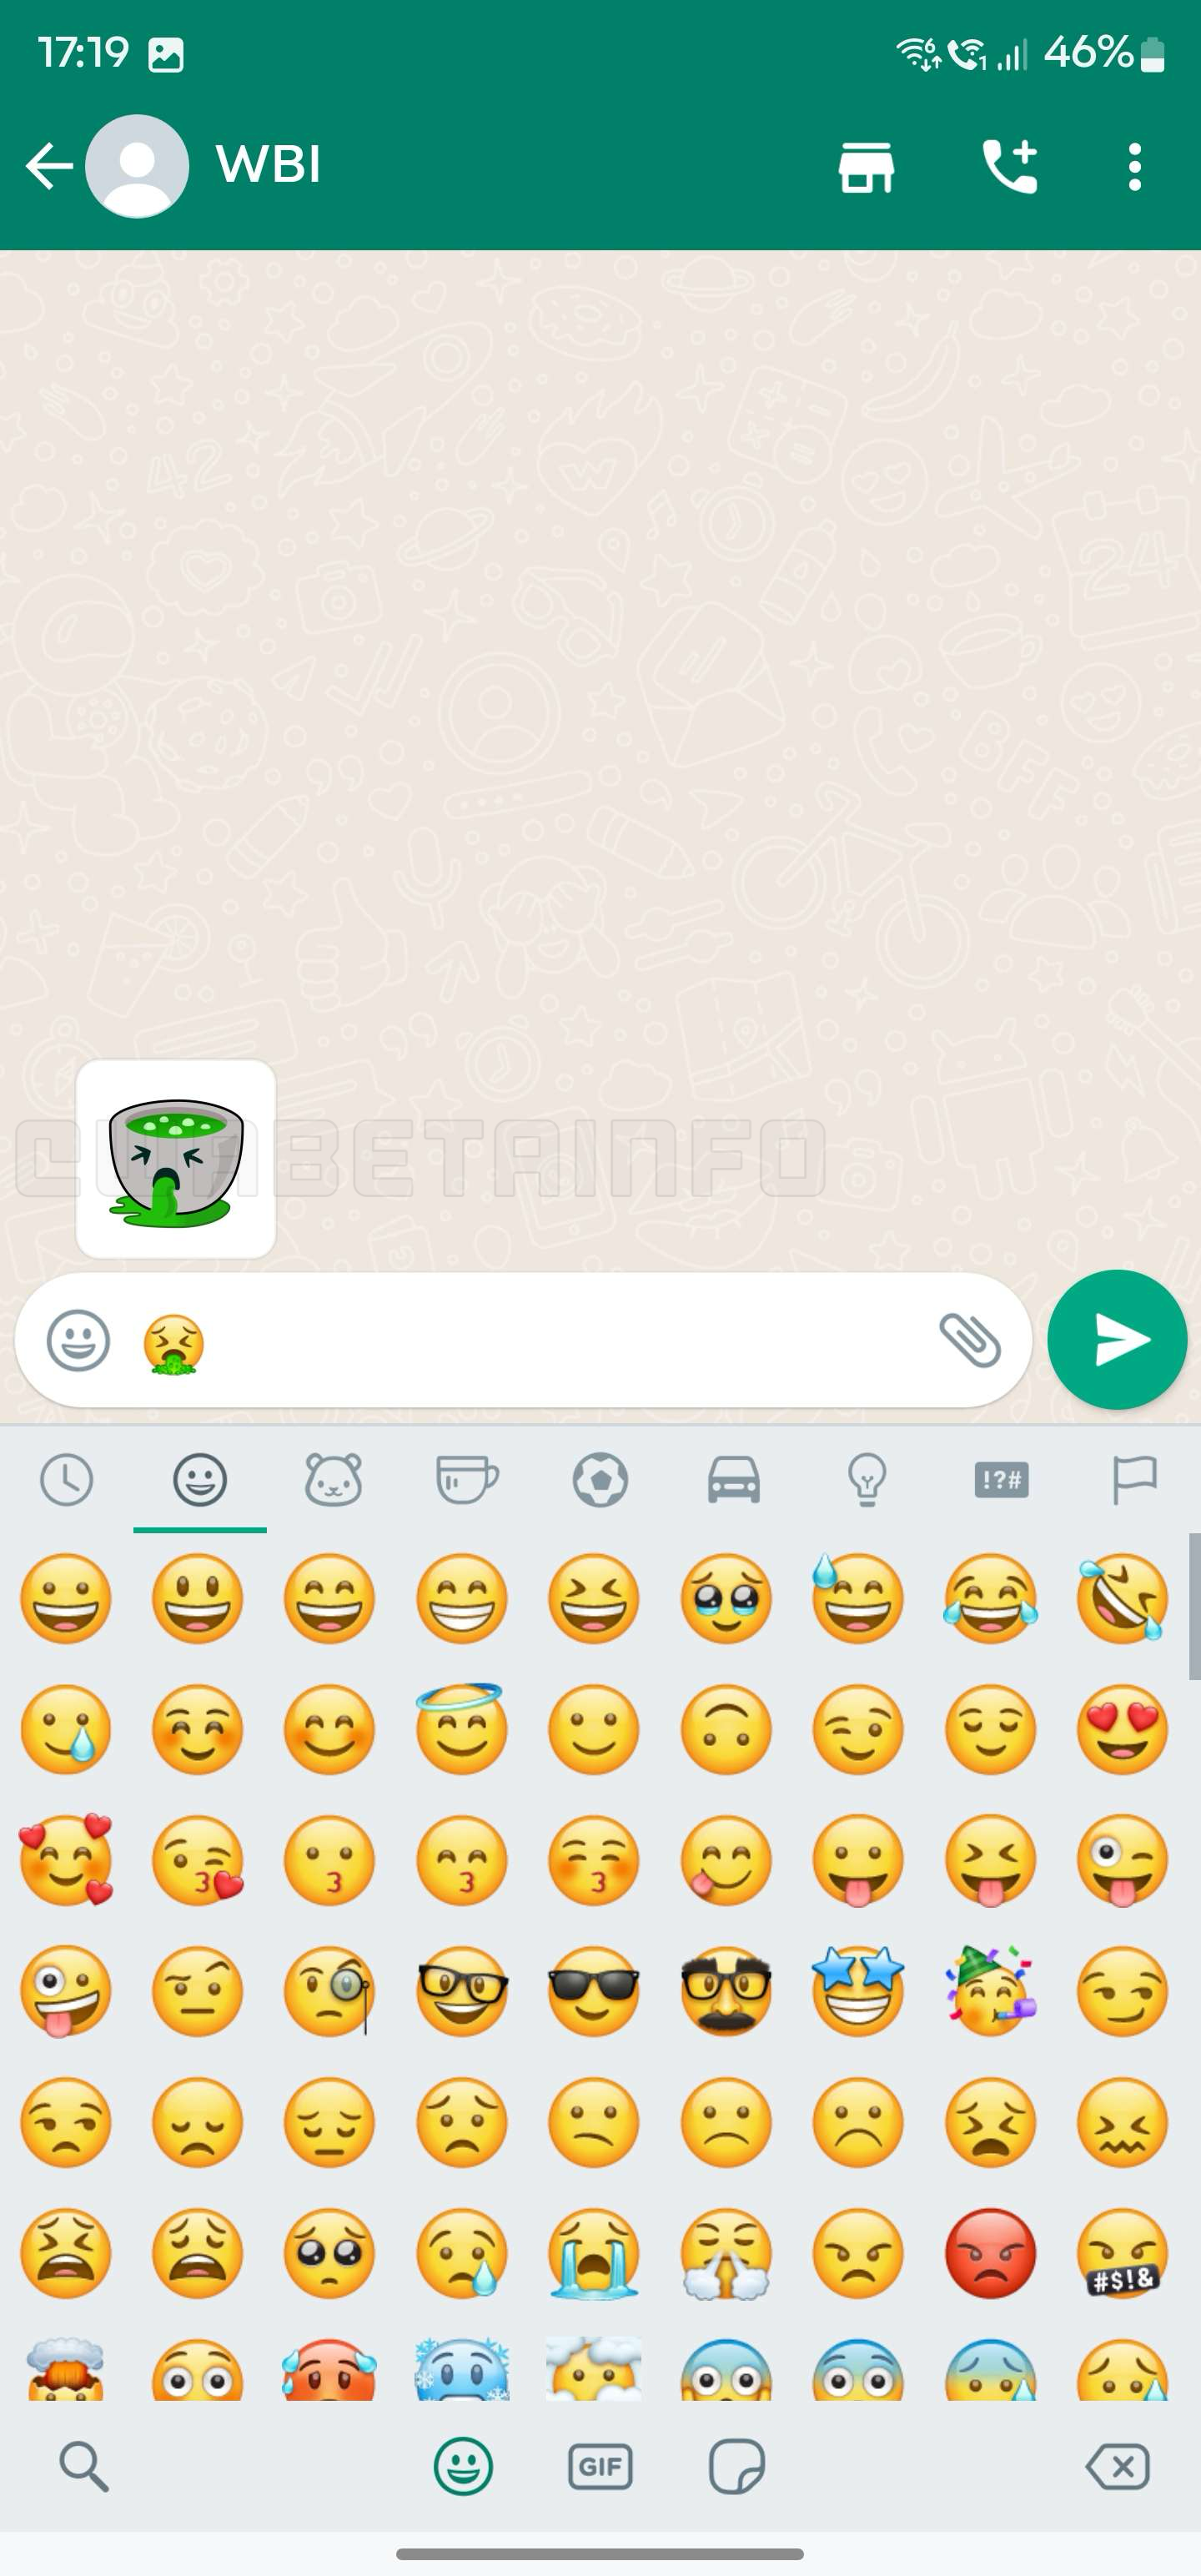 tablet for whatsapp apk download